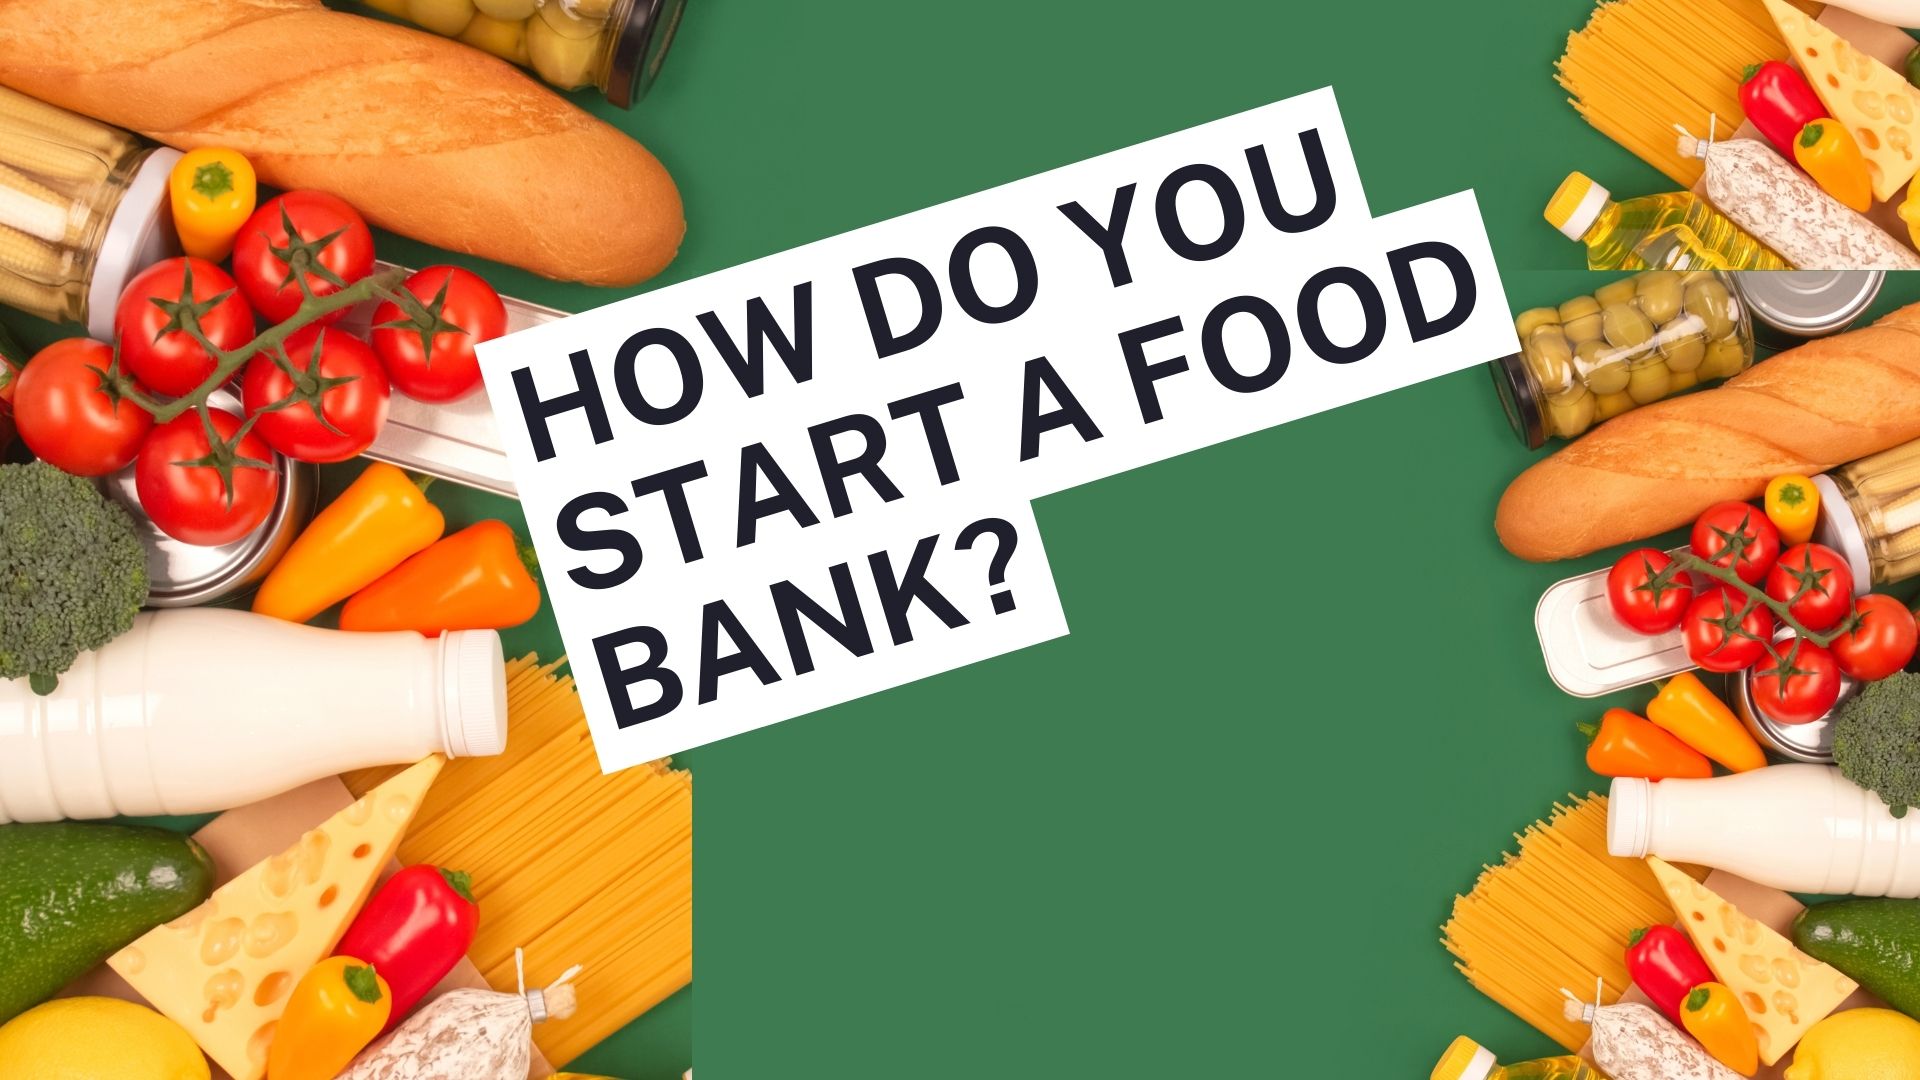 How Do You Start a Food Bank